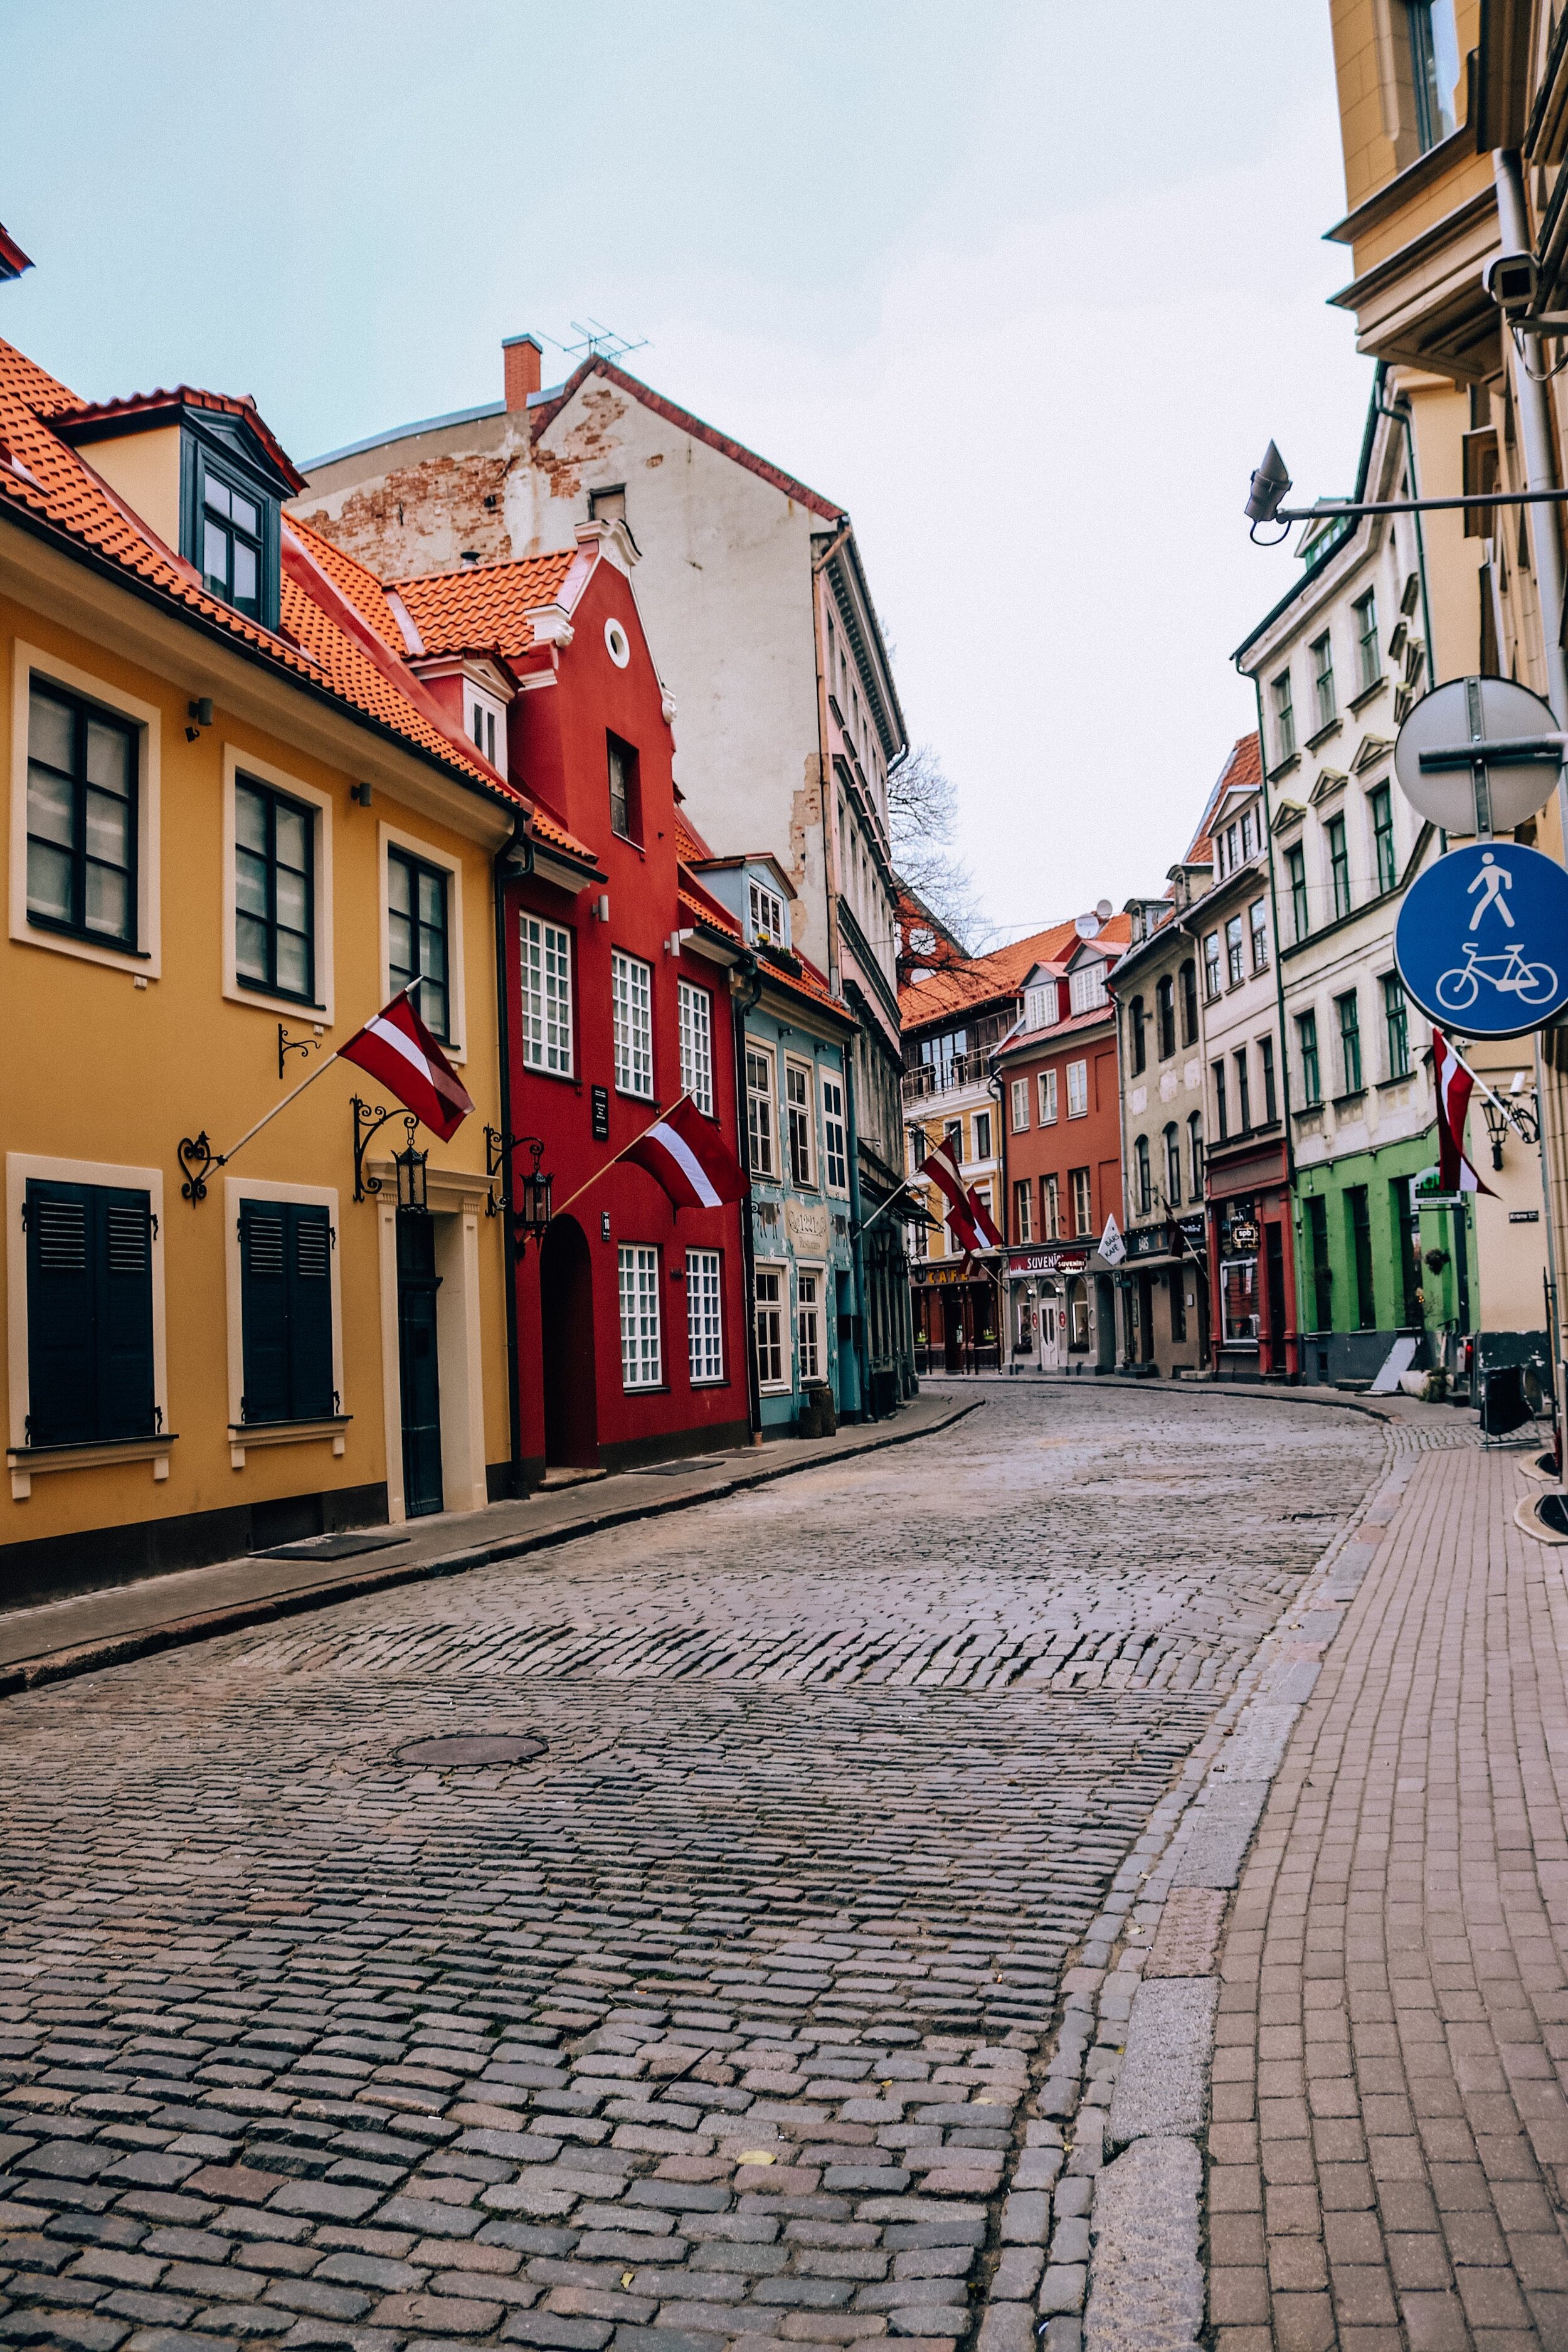 Riga Instagram Locations - the 12 most instagrammable places in Riga, Latvia for your next trip to this beautiful Baltic state| Helena Bradbury travel blog | riga street photography | riga photography | riga latvia old town | riga best photo spots |…